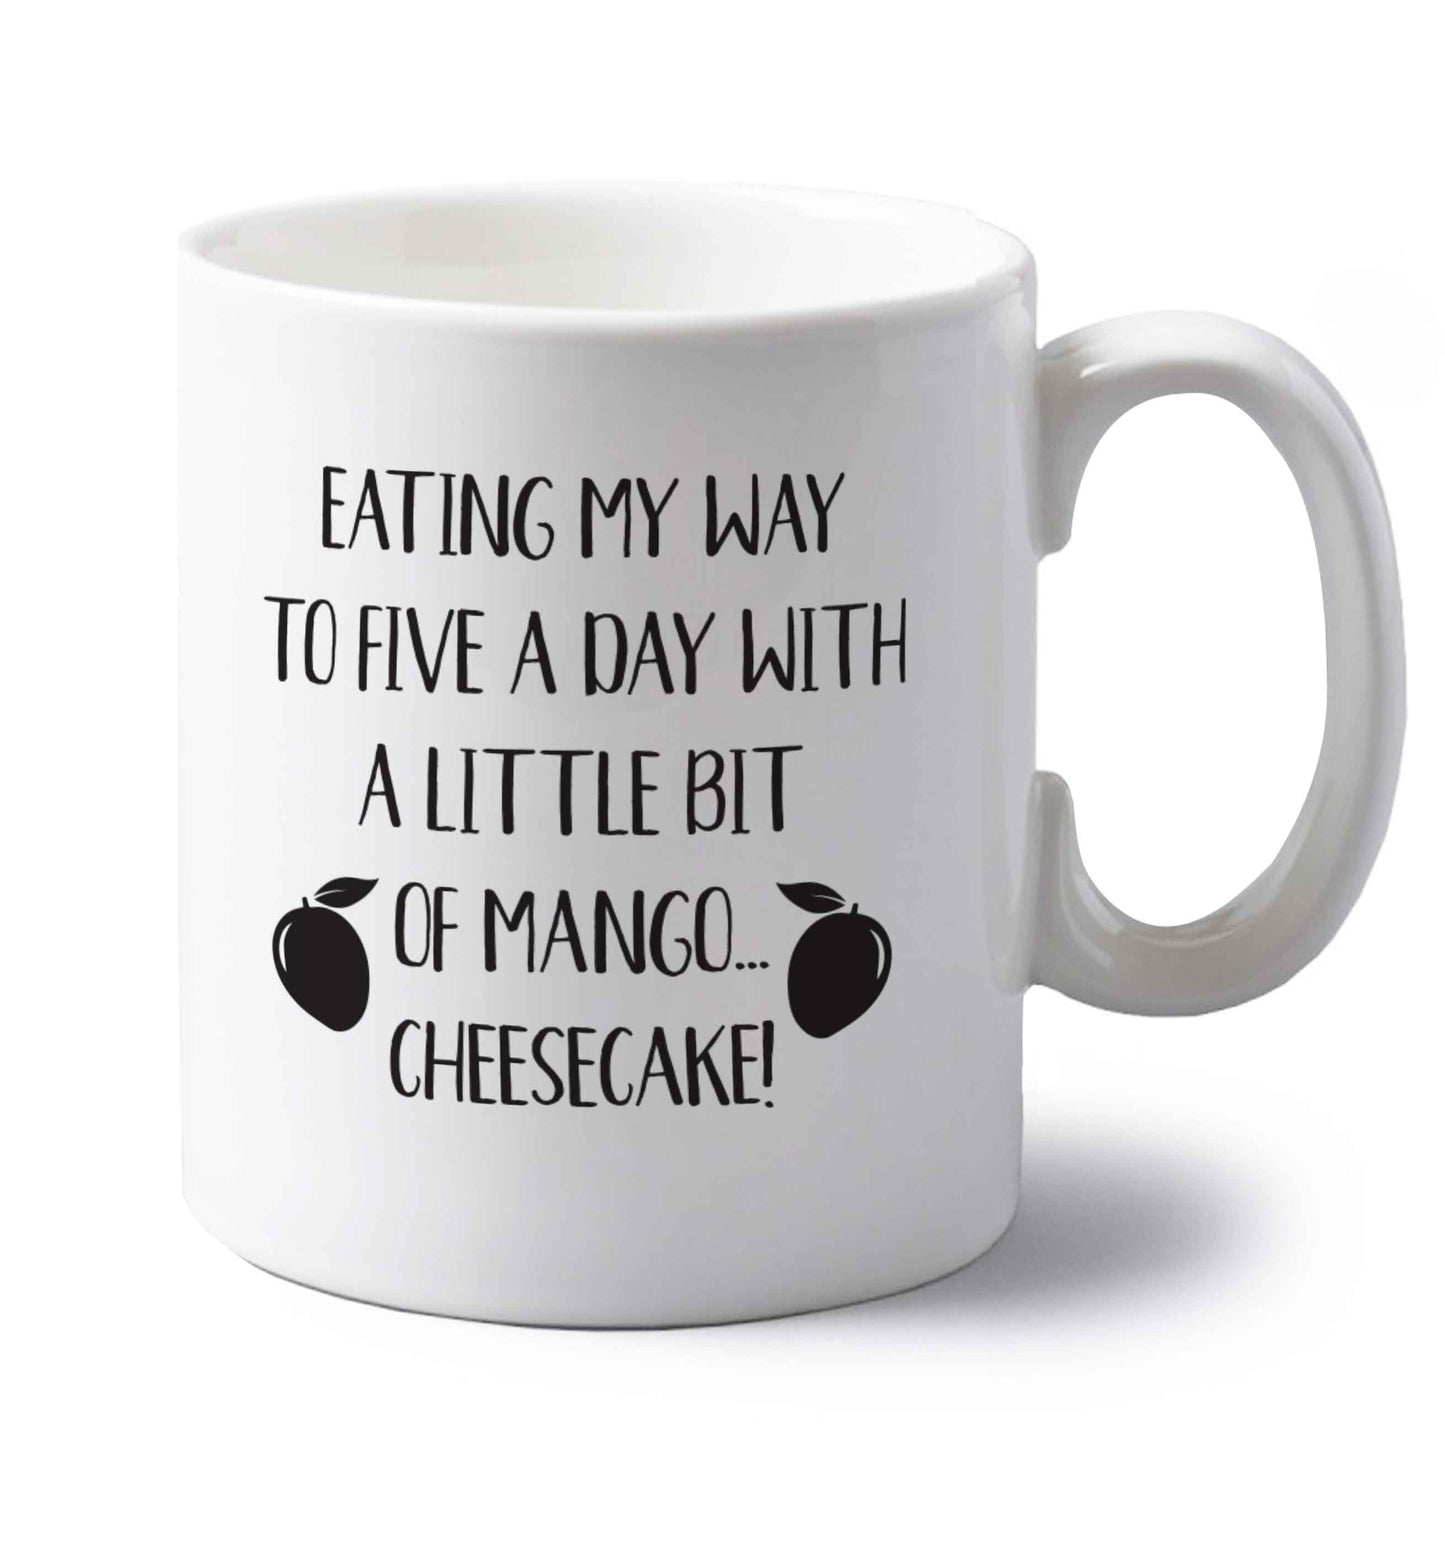 Eating my way to five a day with a little bit of mango cheesecake left handed white ceramic mug 